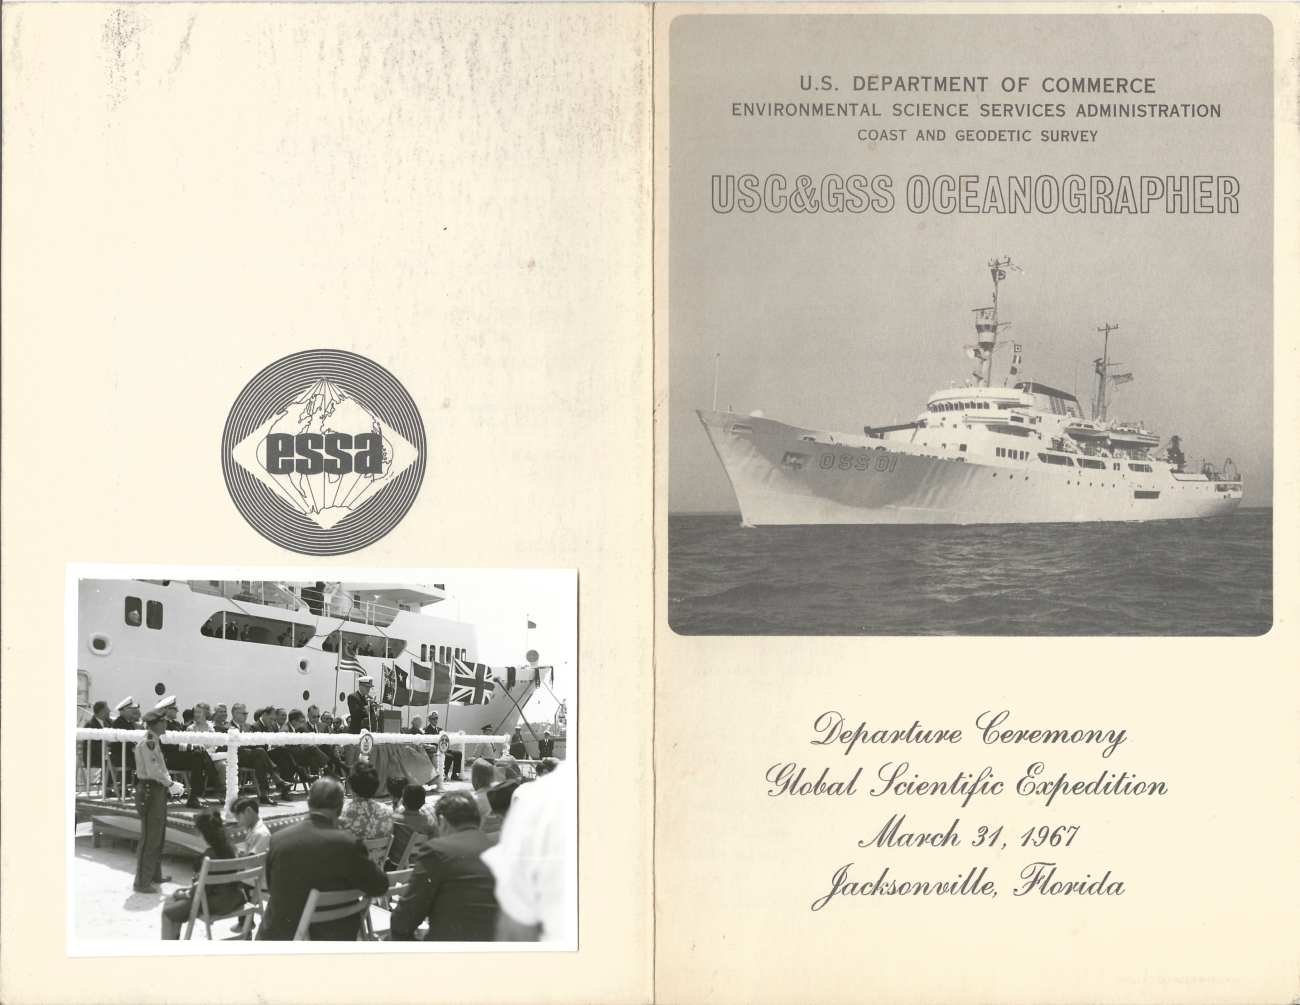 Brochure printed for departure ceremony of USC&GS; Ship OCEANOGRAPHER onaround the world oceanographic cruise